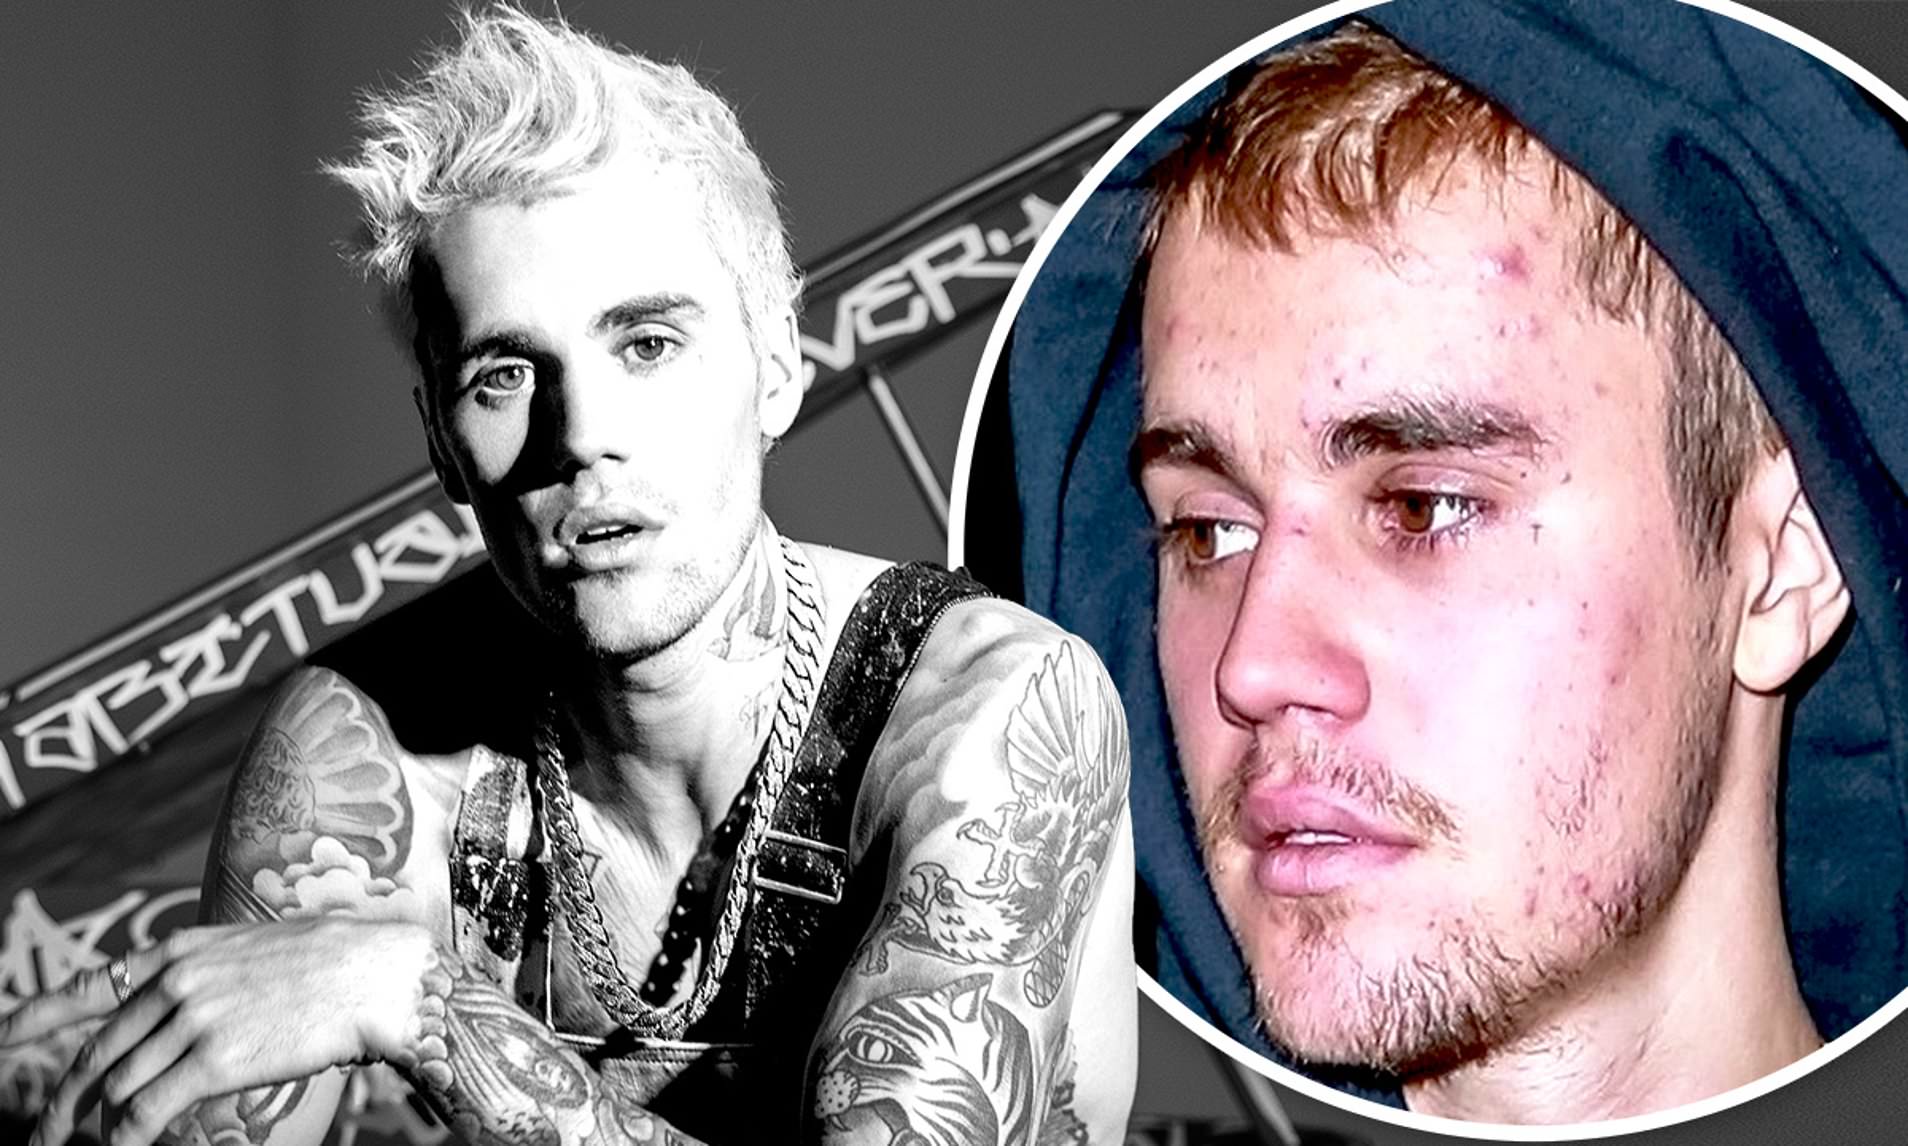 "The Prince of Pop"  Justin Bieber has a strange disease, difficult to diagnose, but with very serious consequences - 1